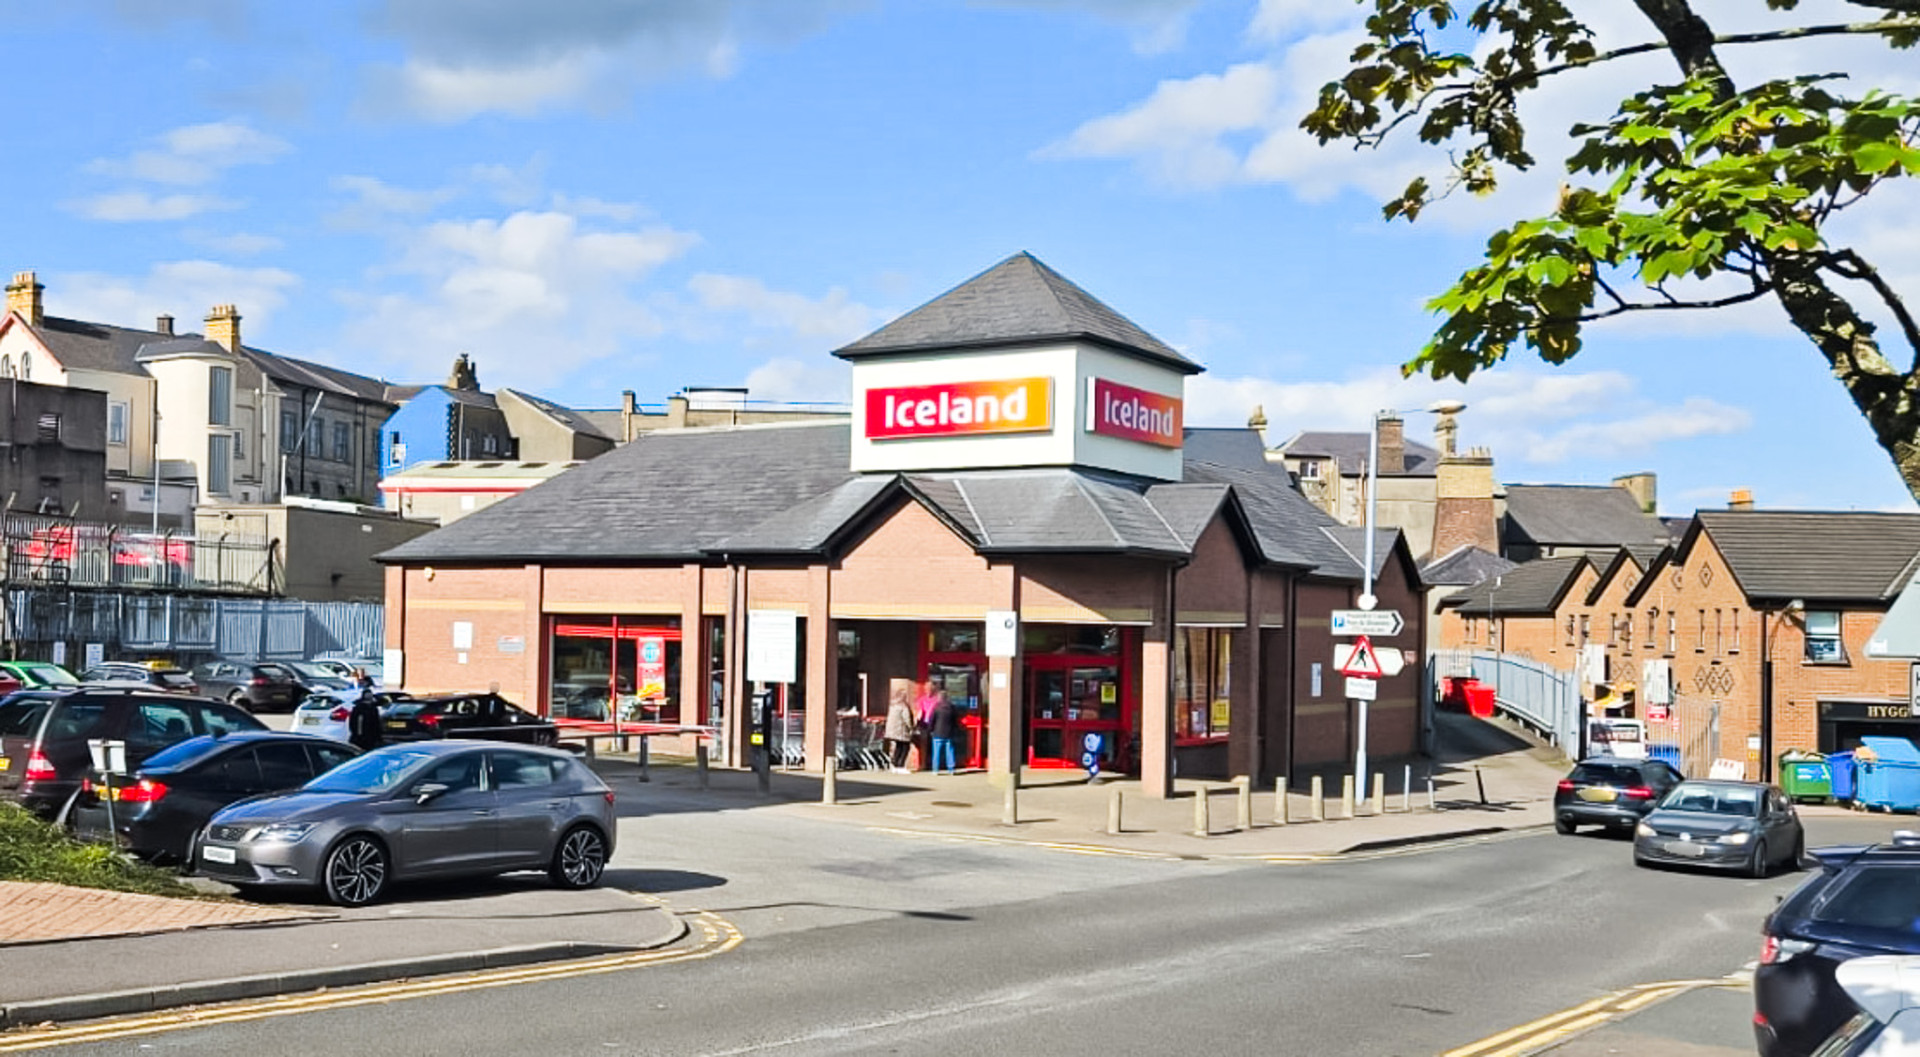 Omagh man remanded in custody after brawl at local supermarket